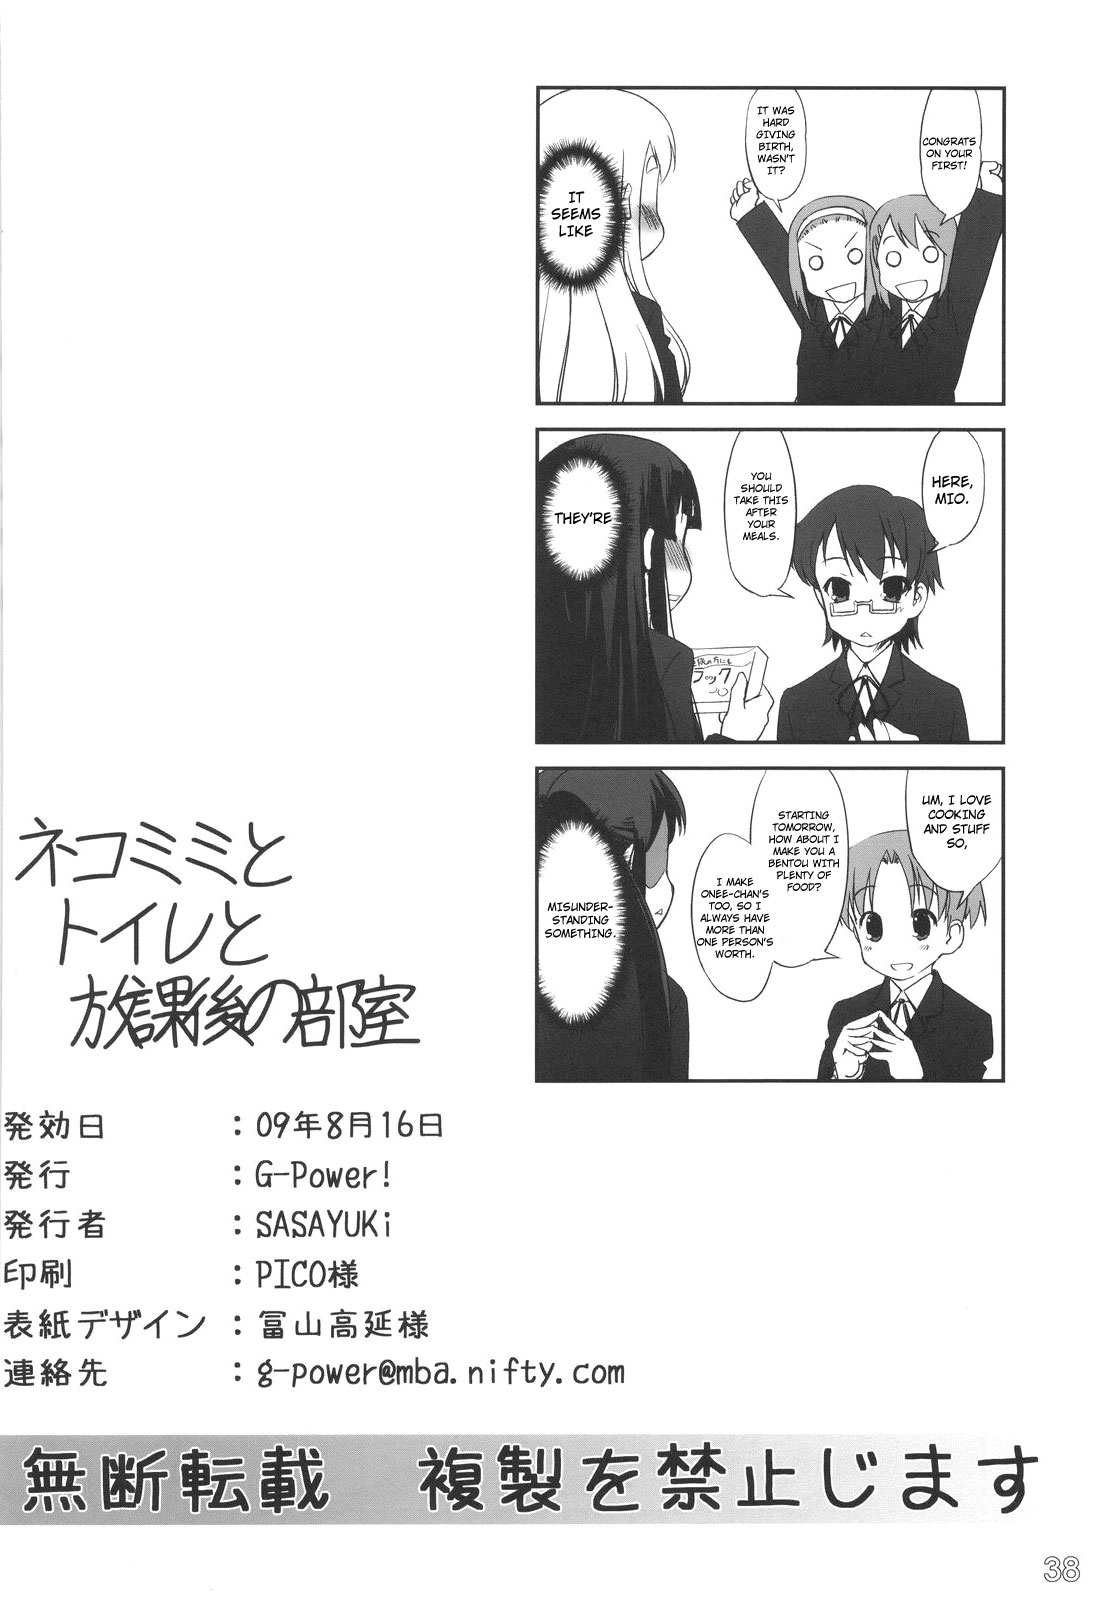 (C76) [G-Power! (Sasayuki)] Nekomimi to Toilet to Houkago no Bushitsu | Cat Ears And A Restroom And The Club Room After School (K-ON) [English] [Nicchiscans-4Dawgz] 35